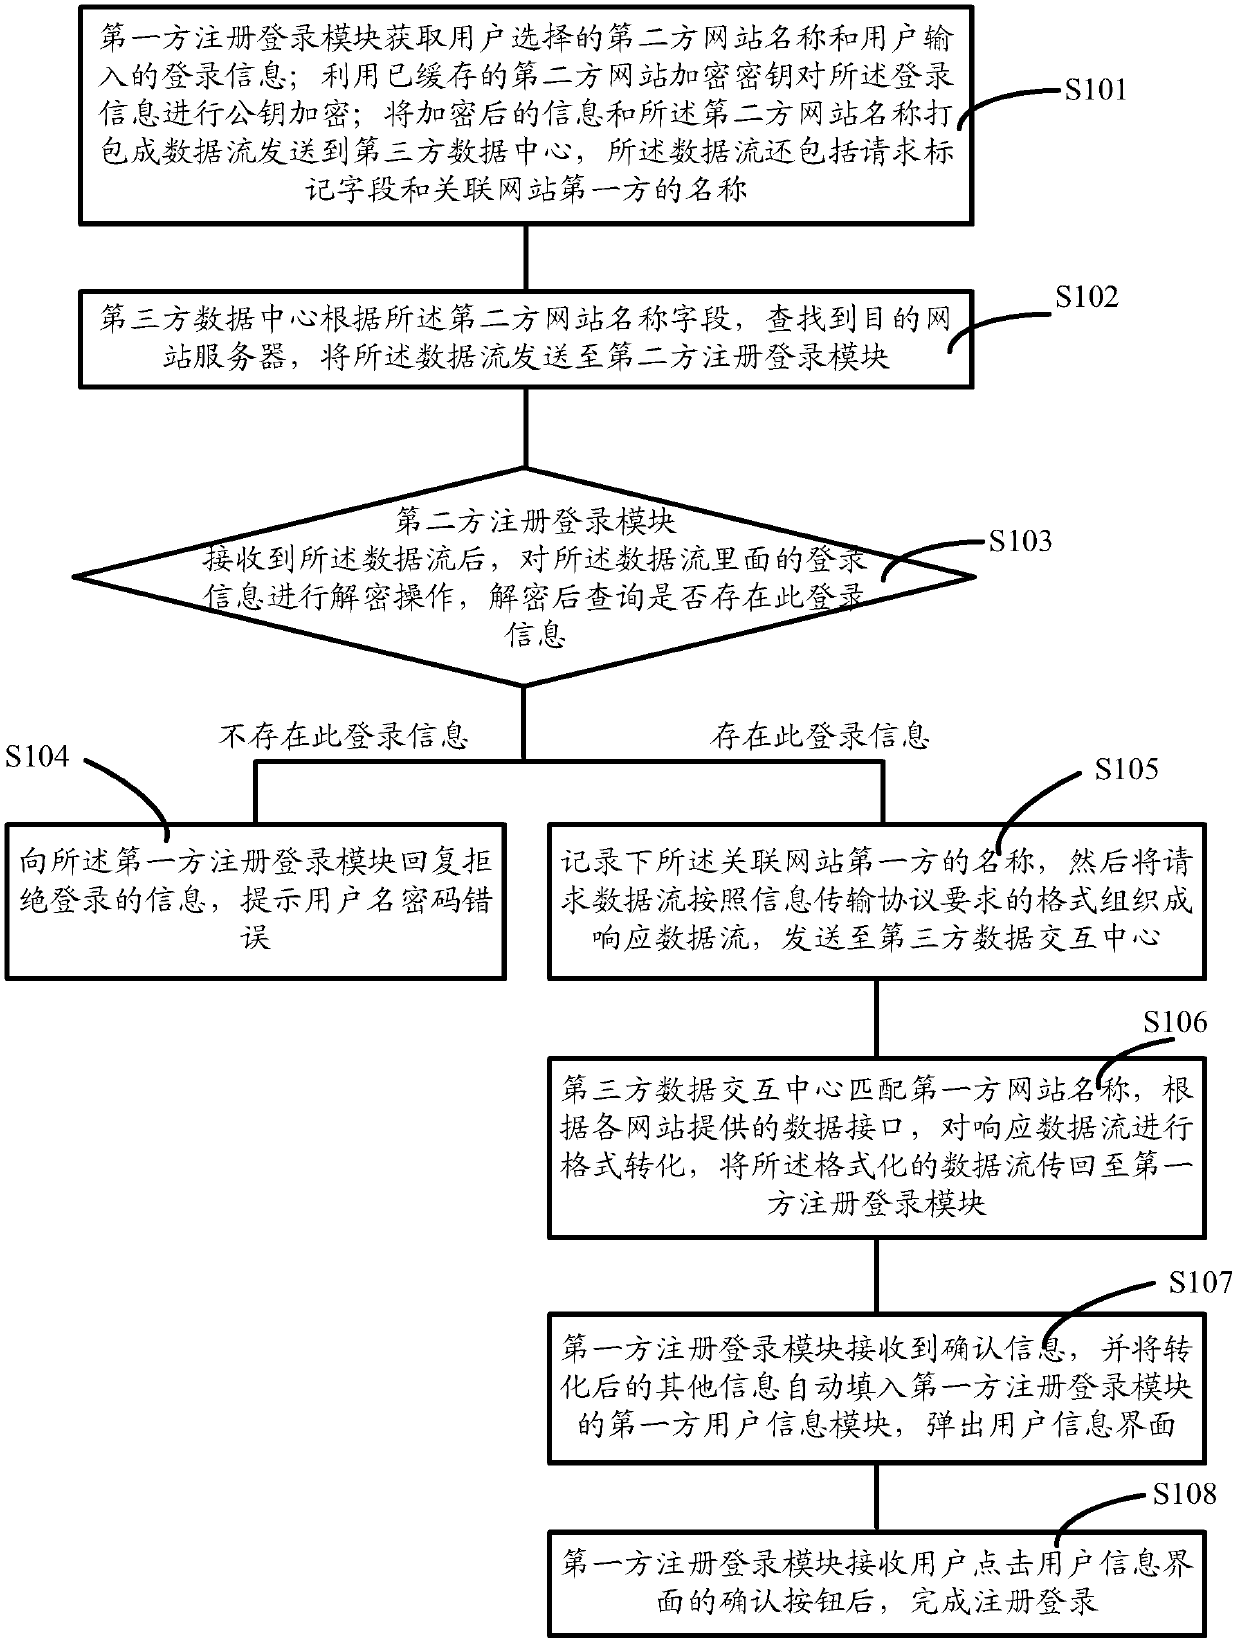 Method and system for carrying out whole-network login authentication by utilizing registered website user information